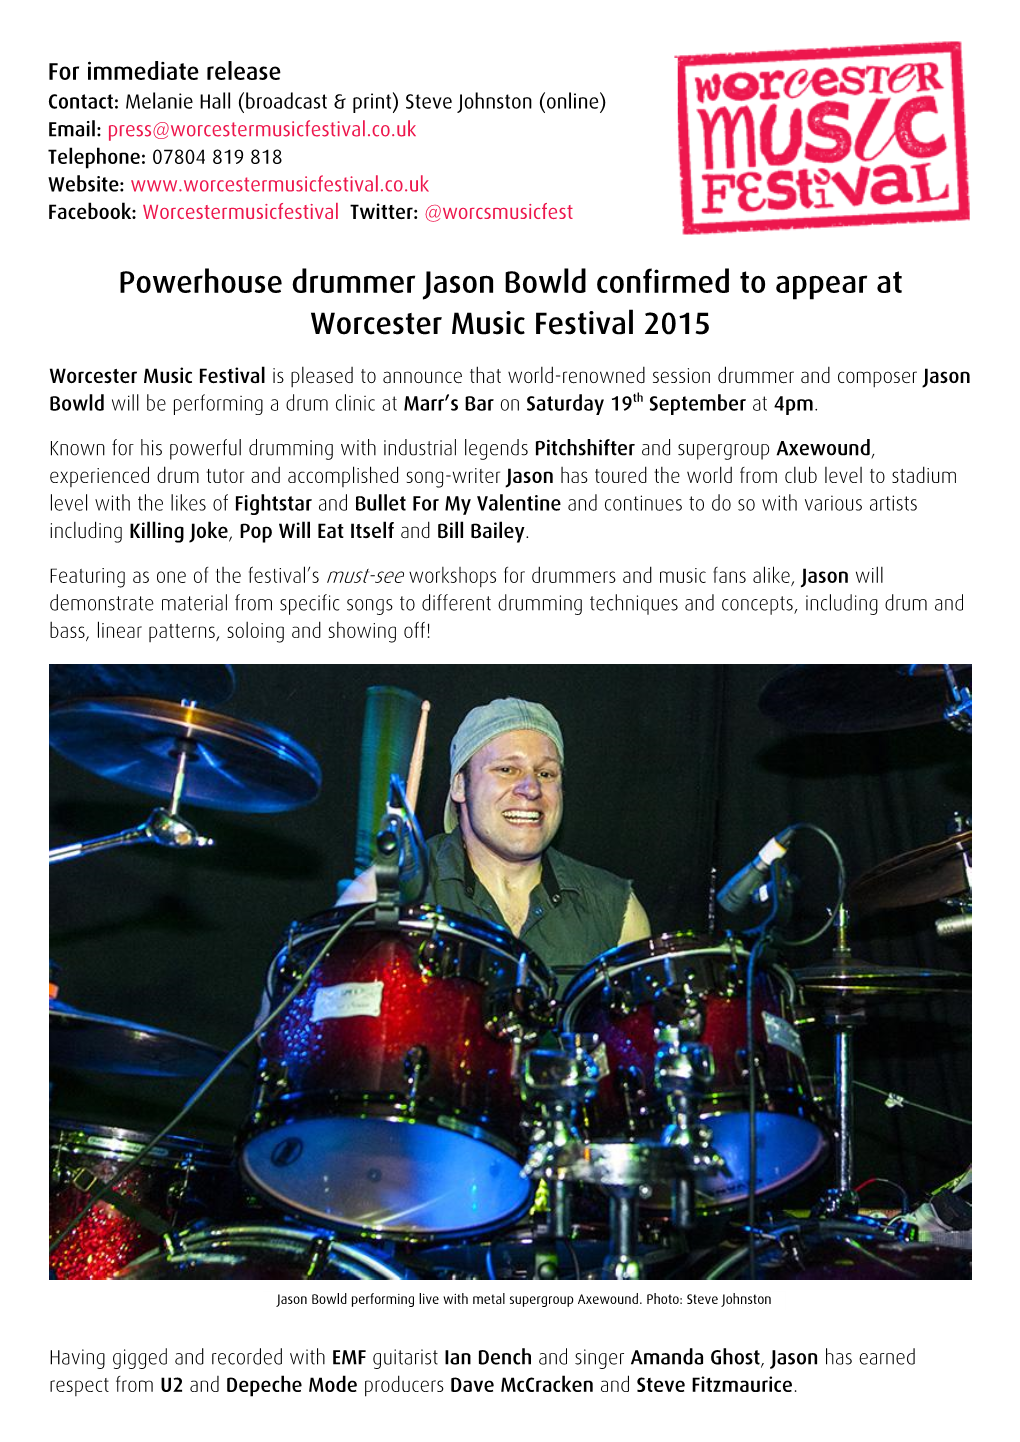 Powerhouse Drummer Jason Bowld Confirmed to Appear at Worcester Music Festival 2015